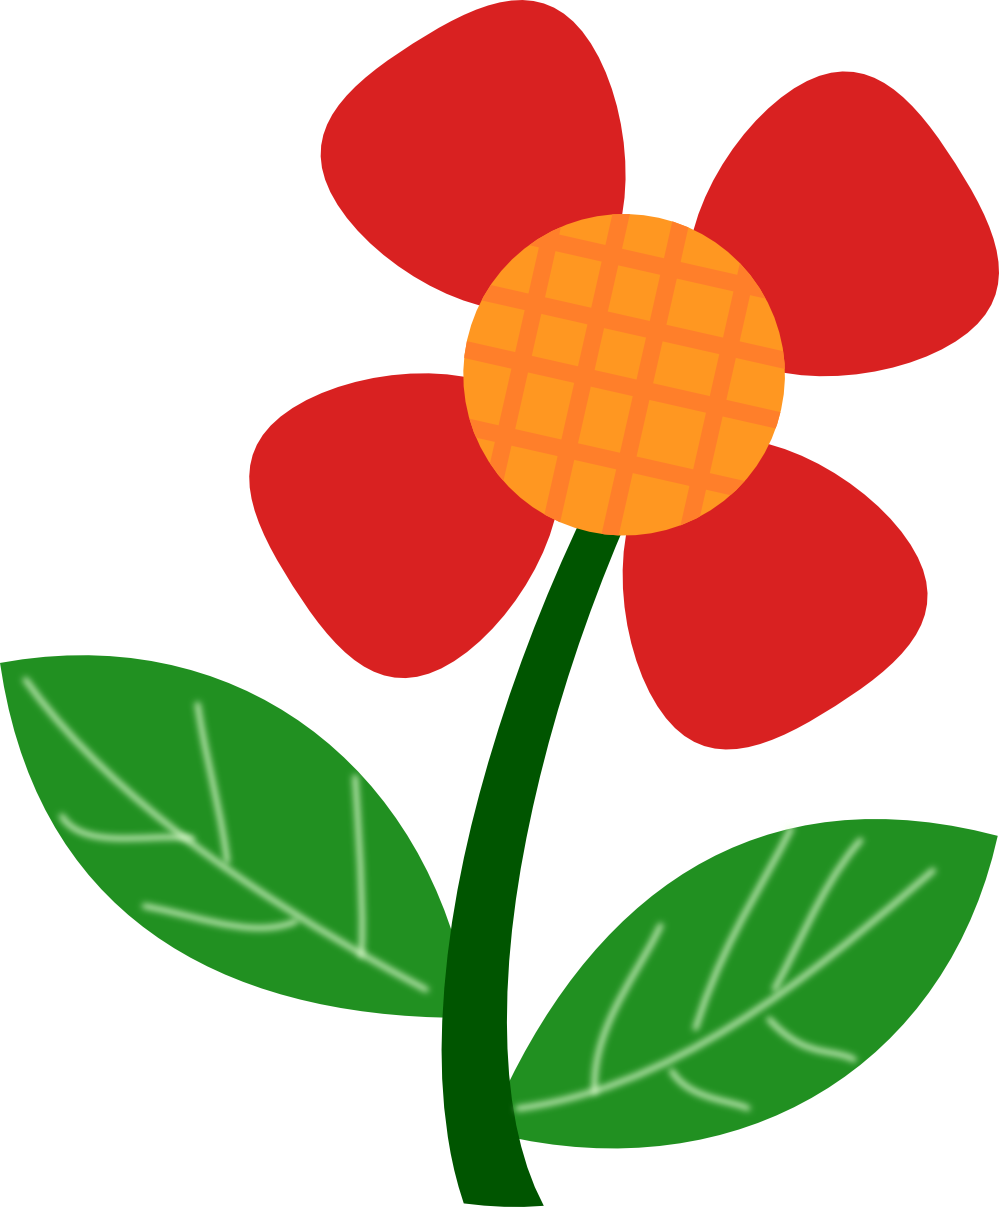 Flowers flower clipart free clipart images 2